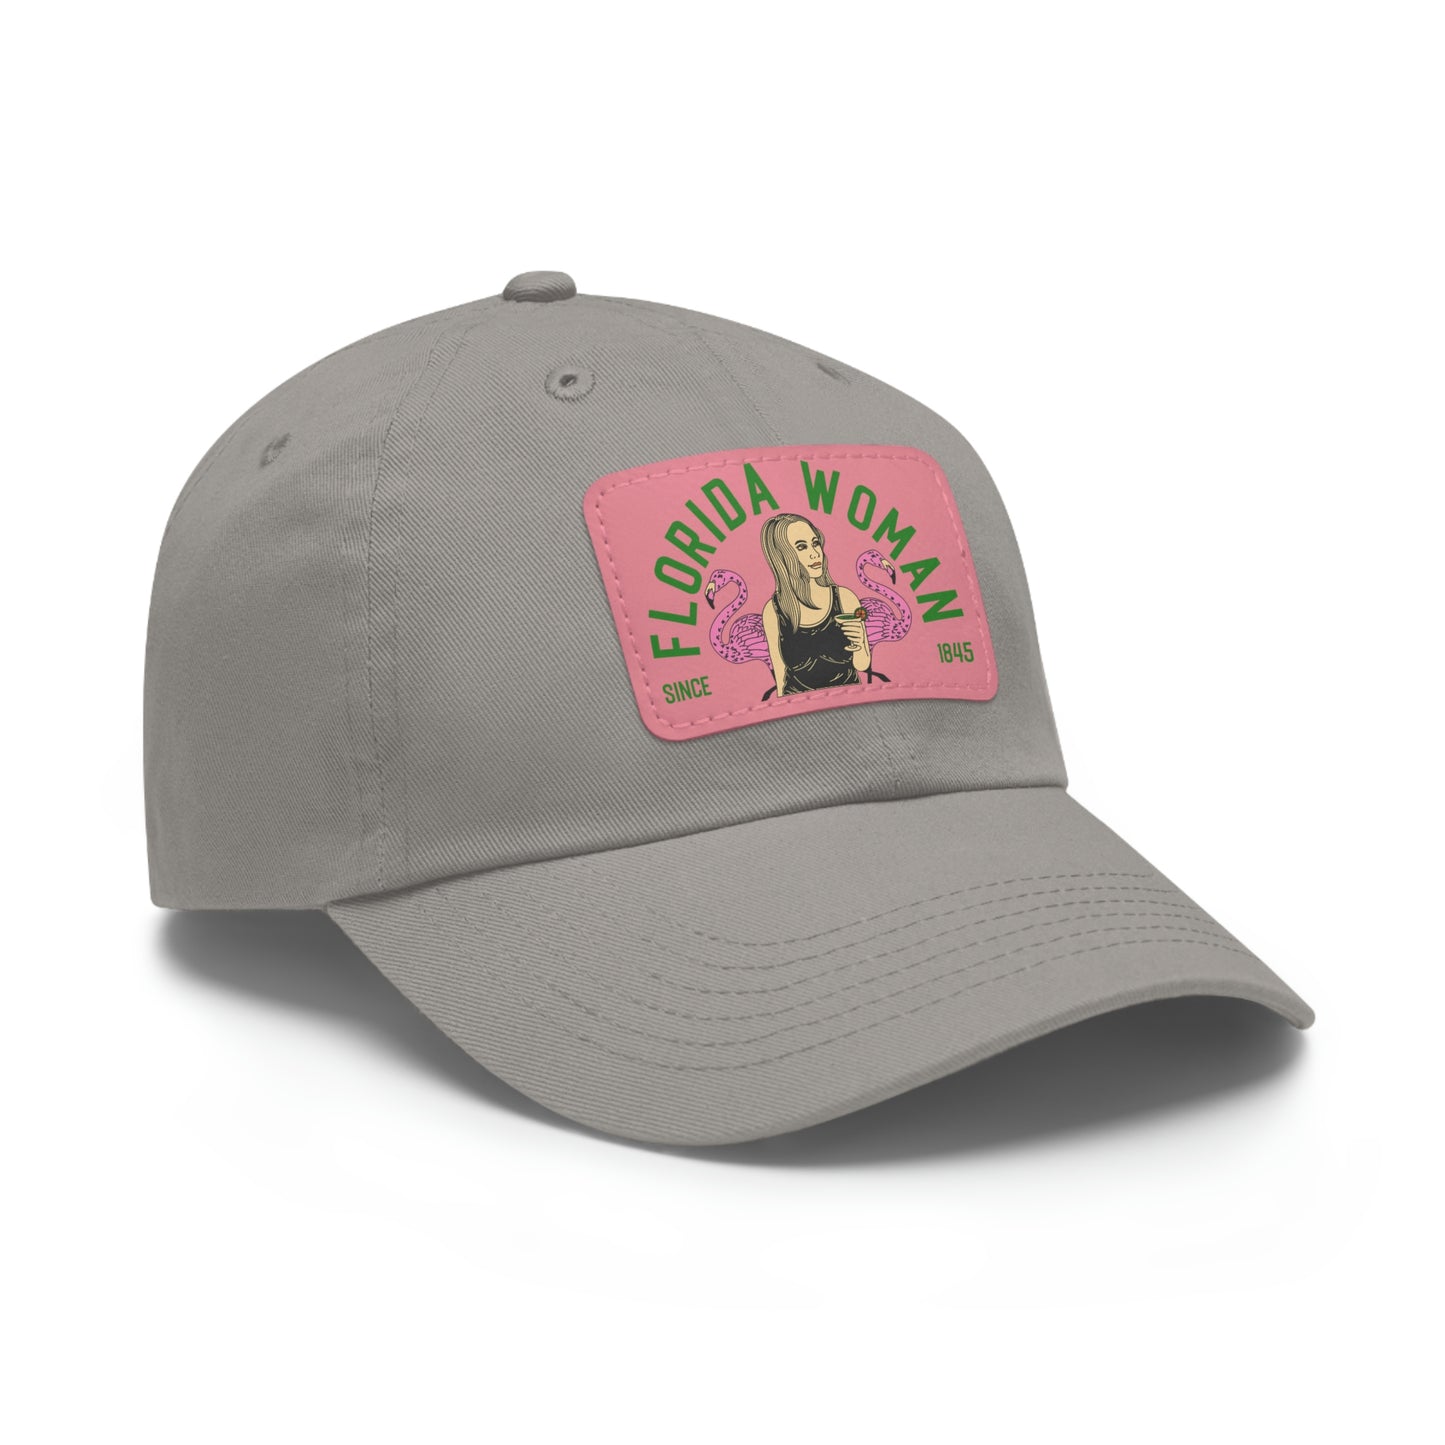 Florida Woman Boozes with Flamingos - Dad Hat with Leather Patch